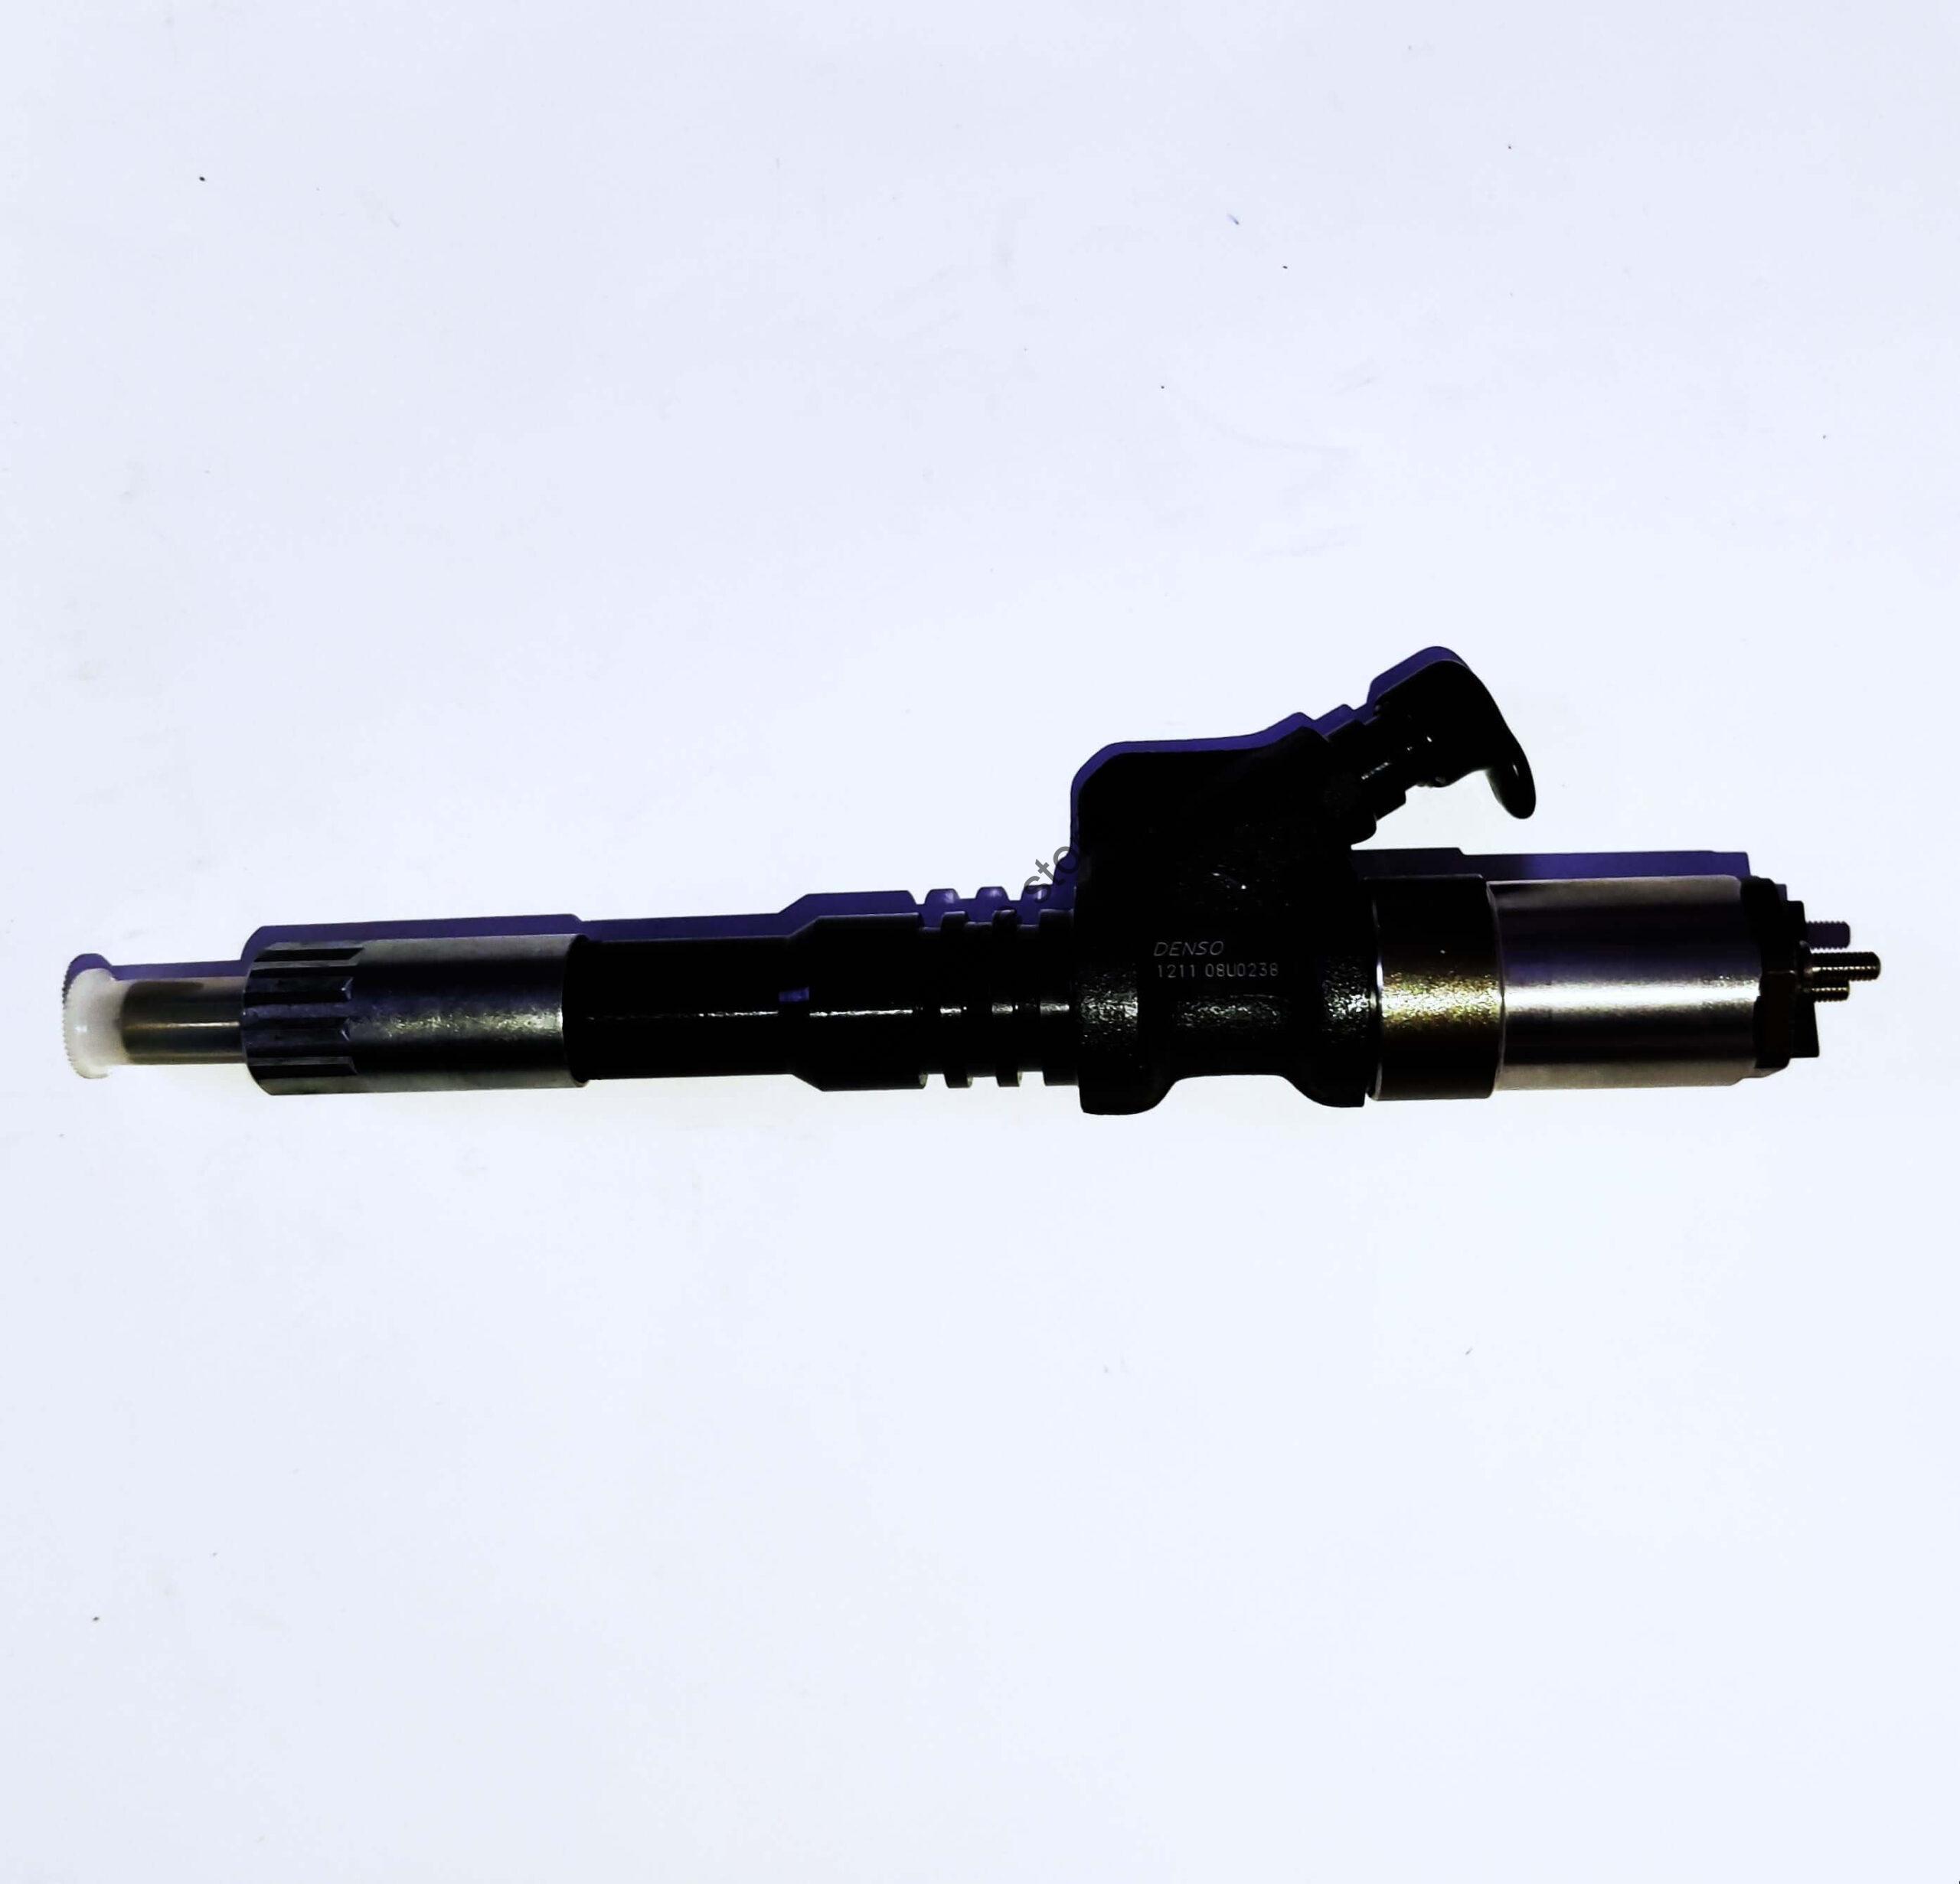 Genuine Reconditioned Denso Diesel Fuel Injector for Komatsu Engines.